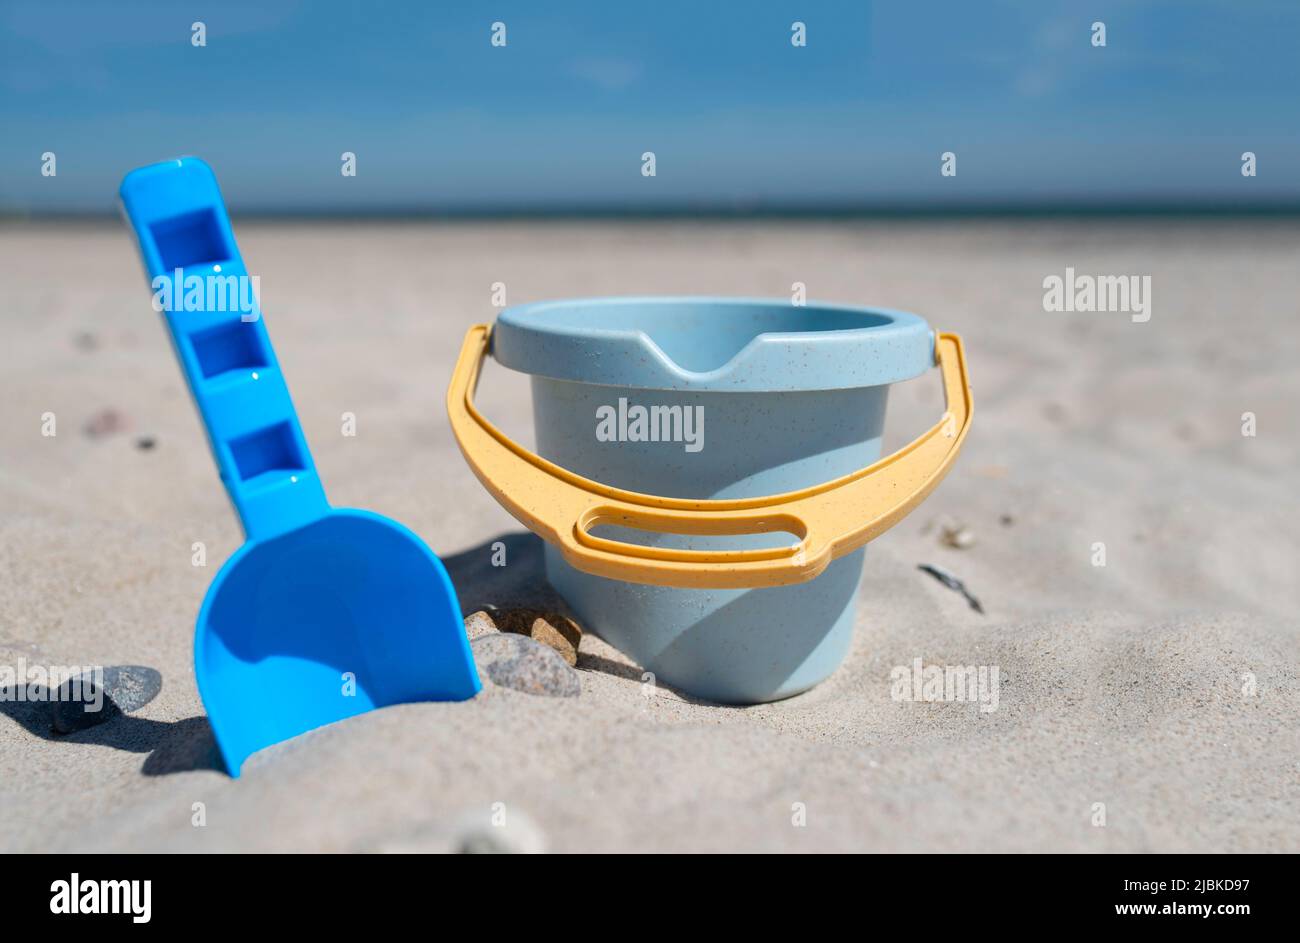 close-up view of toy bucket and spade on sand beach against sea and blue sky Stock Photo